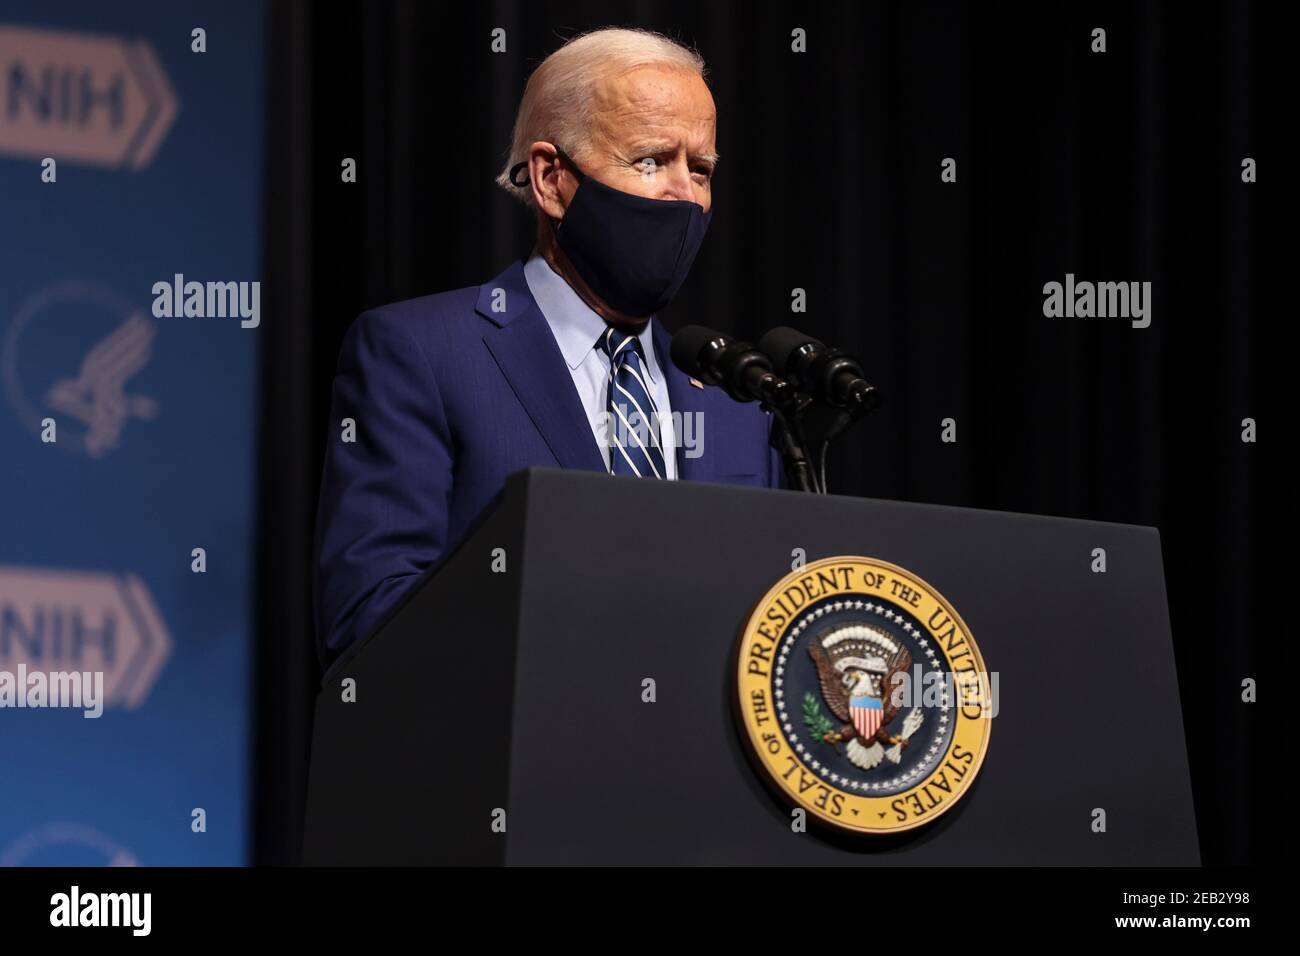 President Joe Biden talks to staff at the National Institutes of Health on Thursday, February 11, 2021 in Bethesda, Maryland. Credit: Oliver Contreras/Pool via CNP/MediaPunch Stock Photo